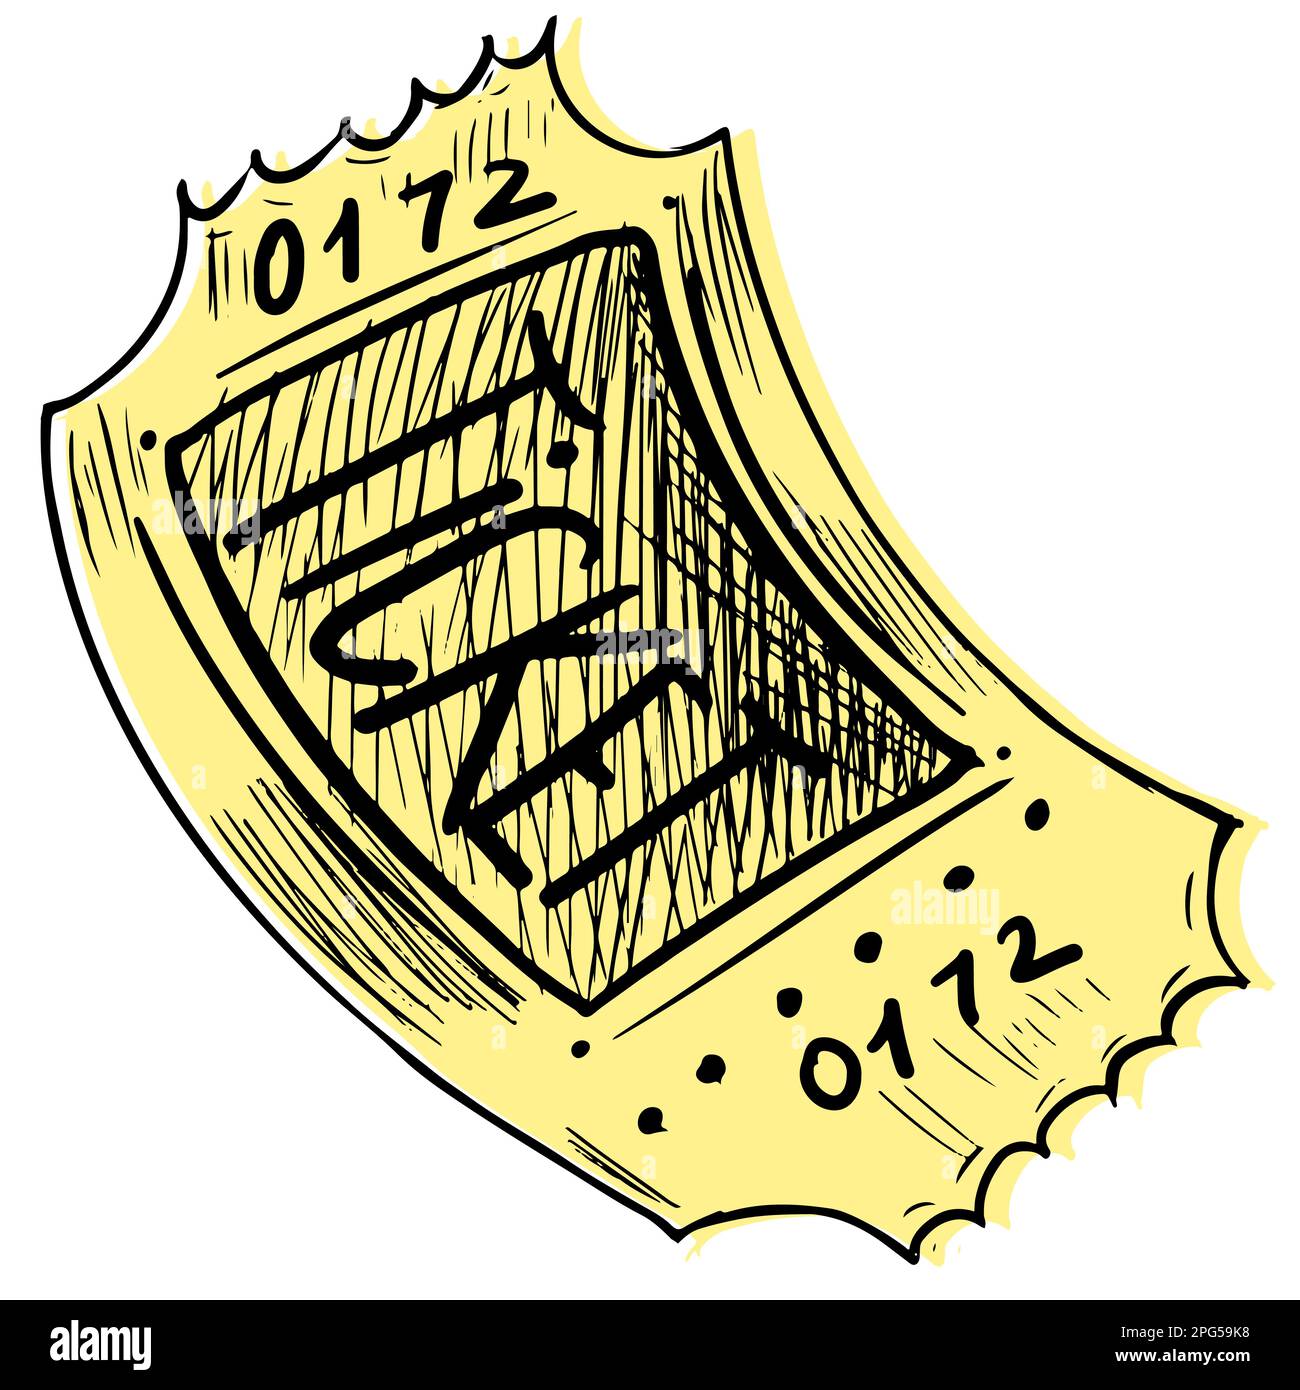 golden-ticket-in-sketch-style-on-a-white-background-stock-vector-image